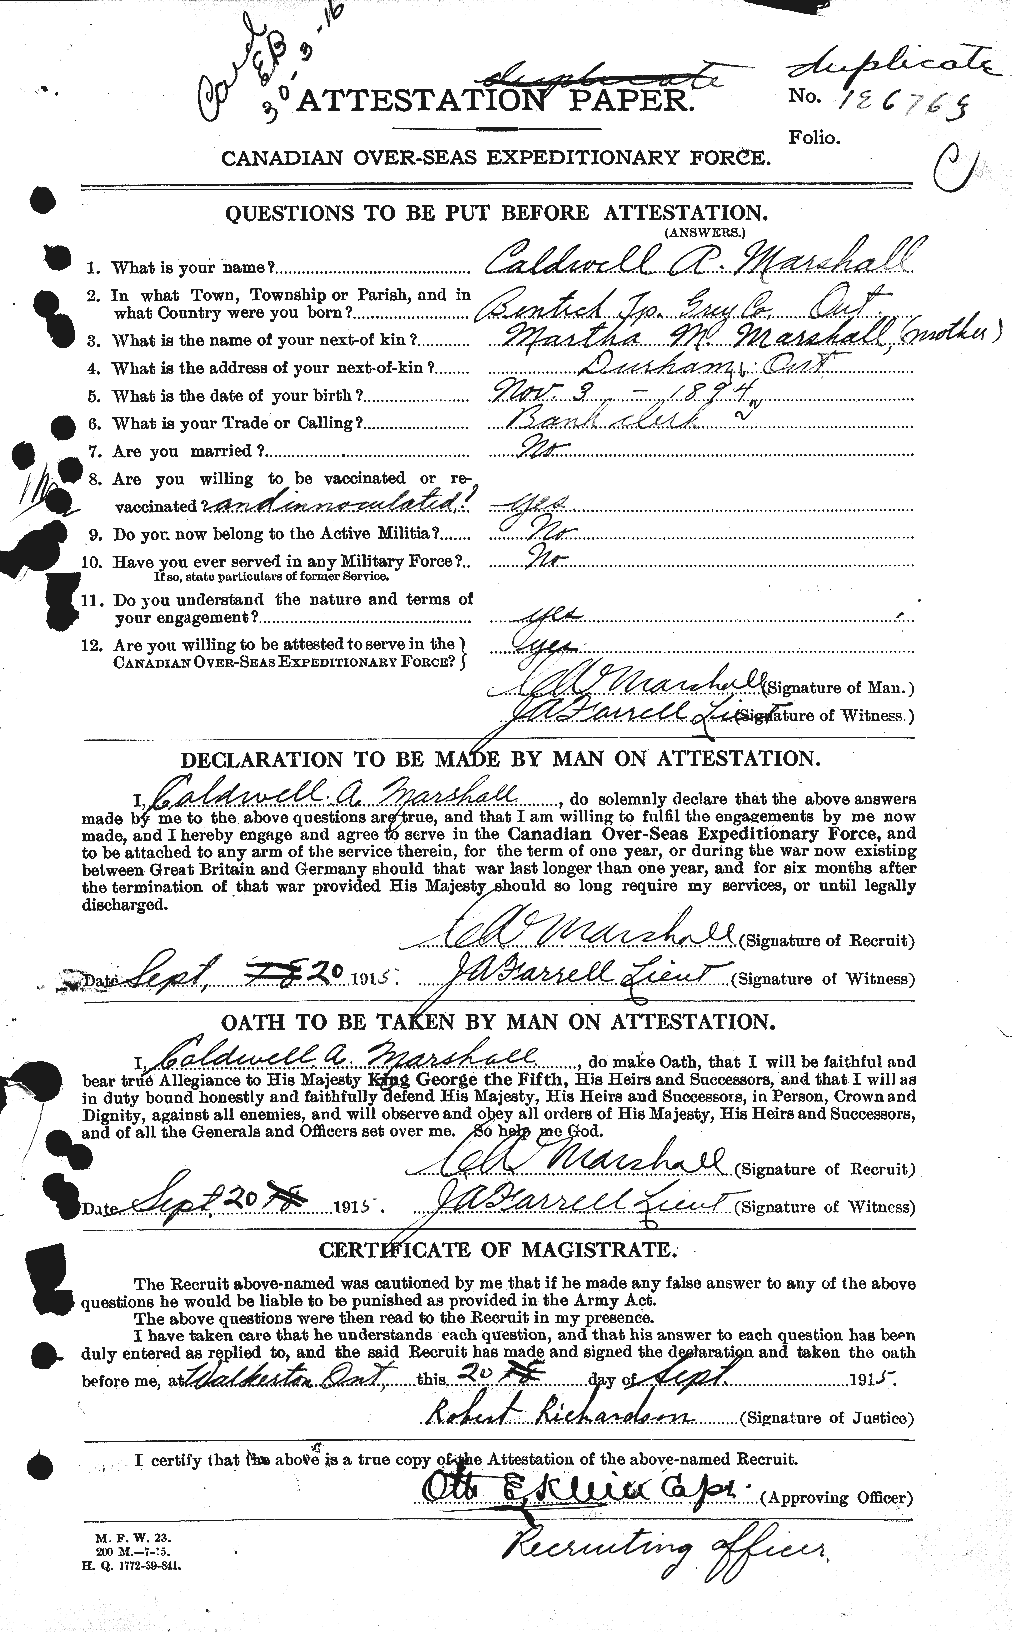 Personnel Records of the First World War - CEF 482005a